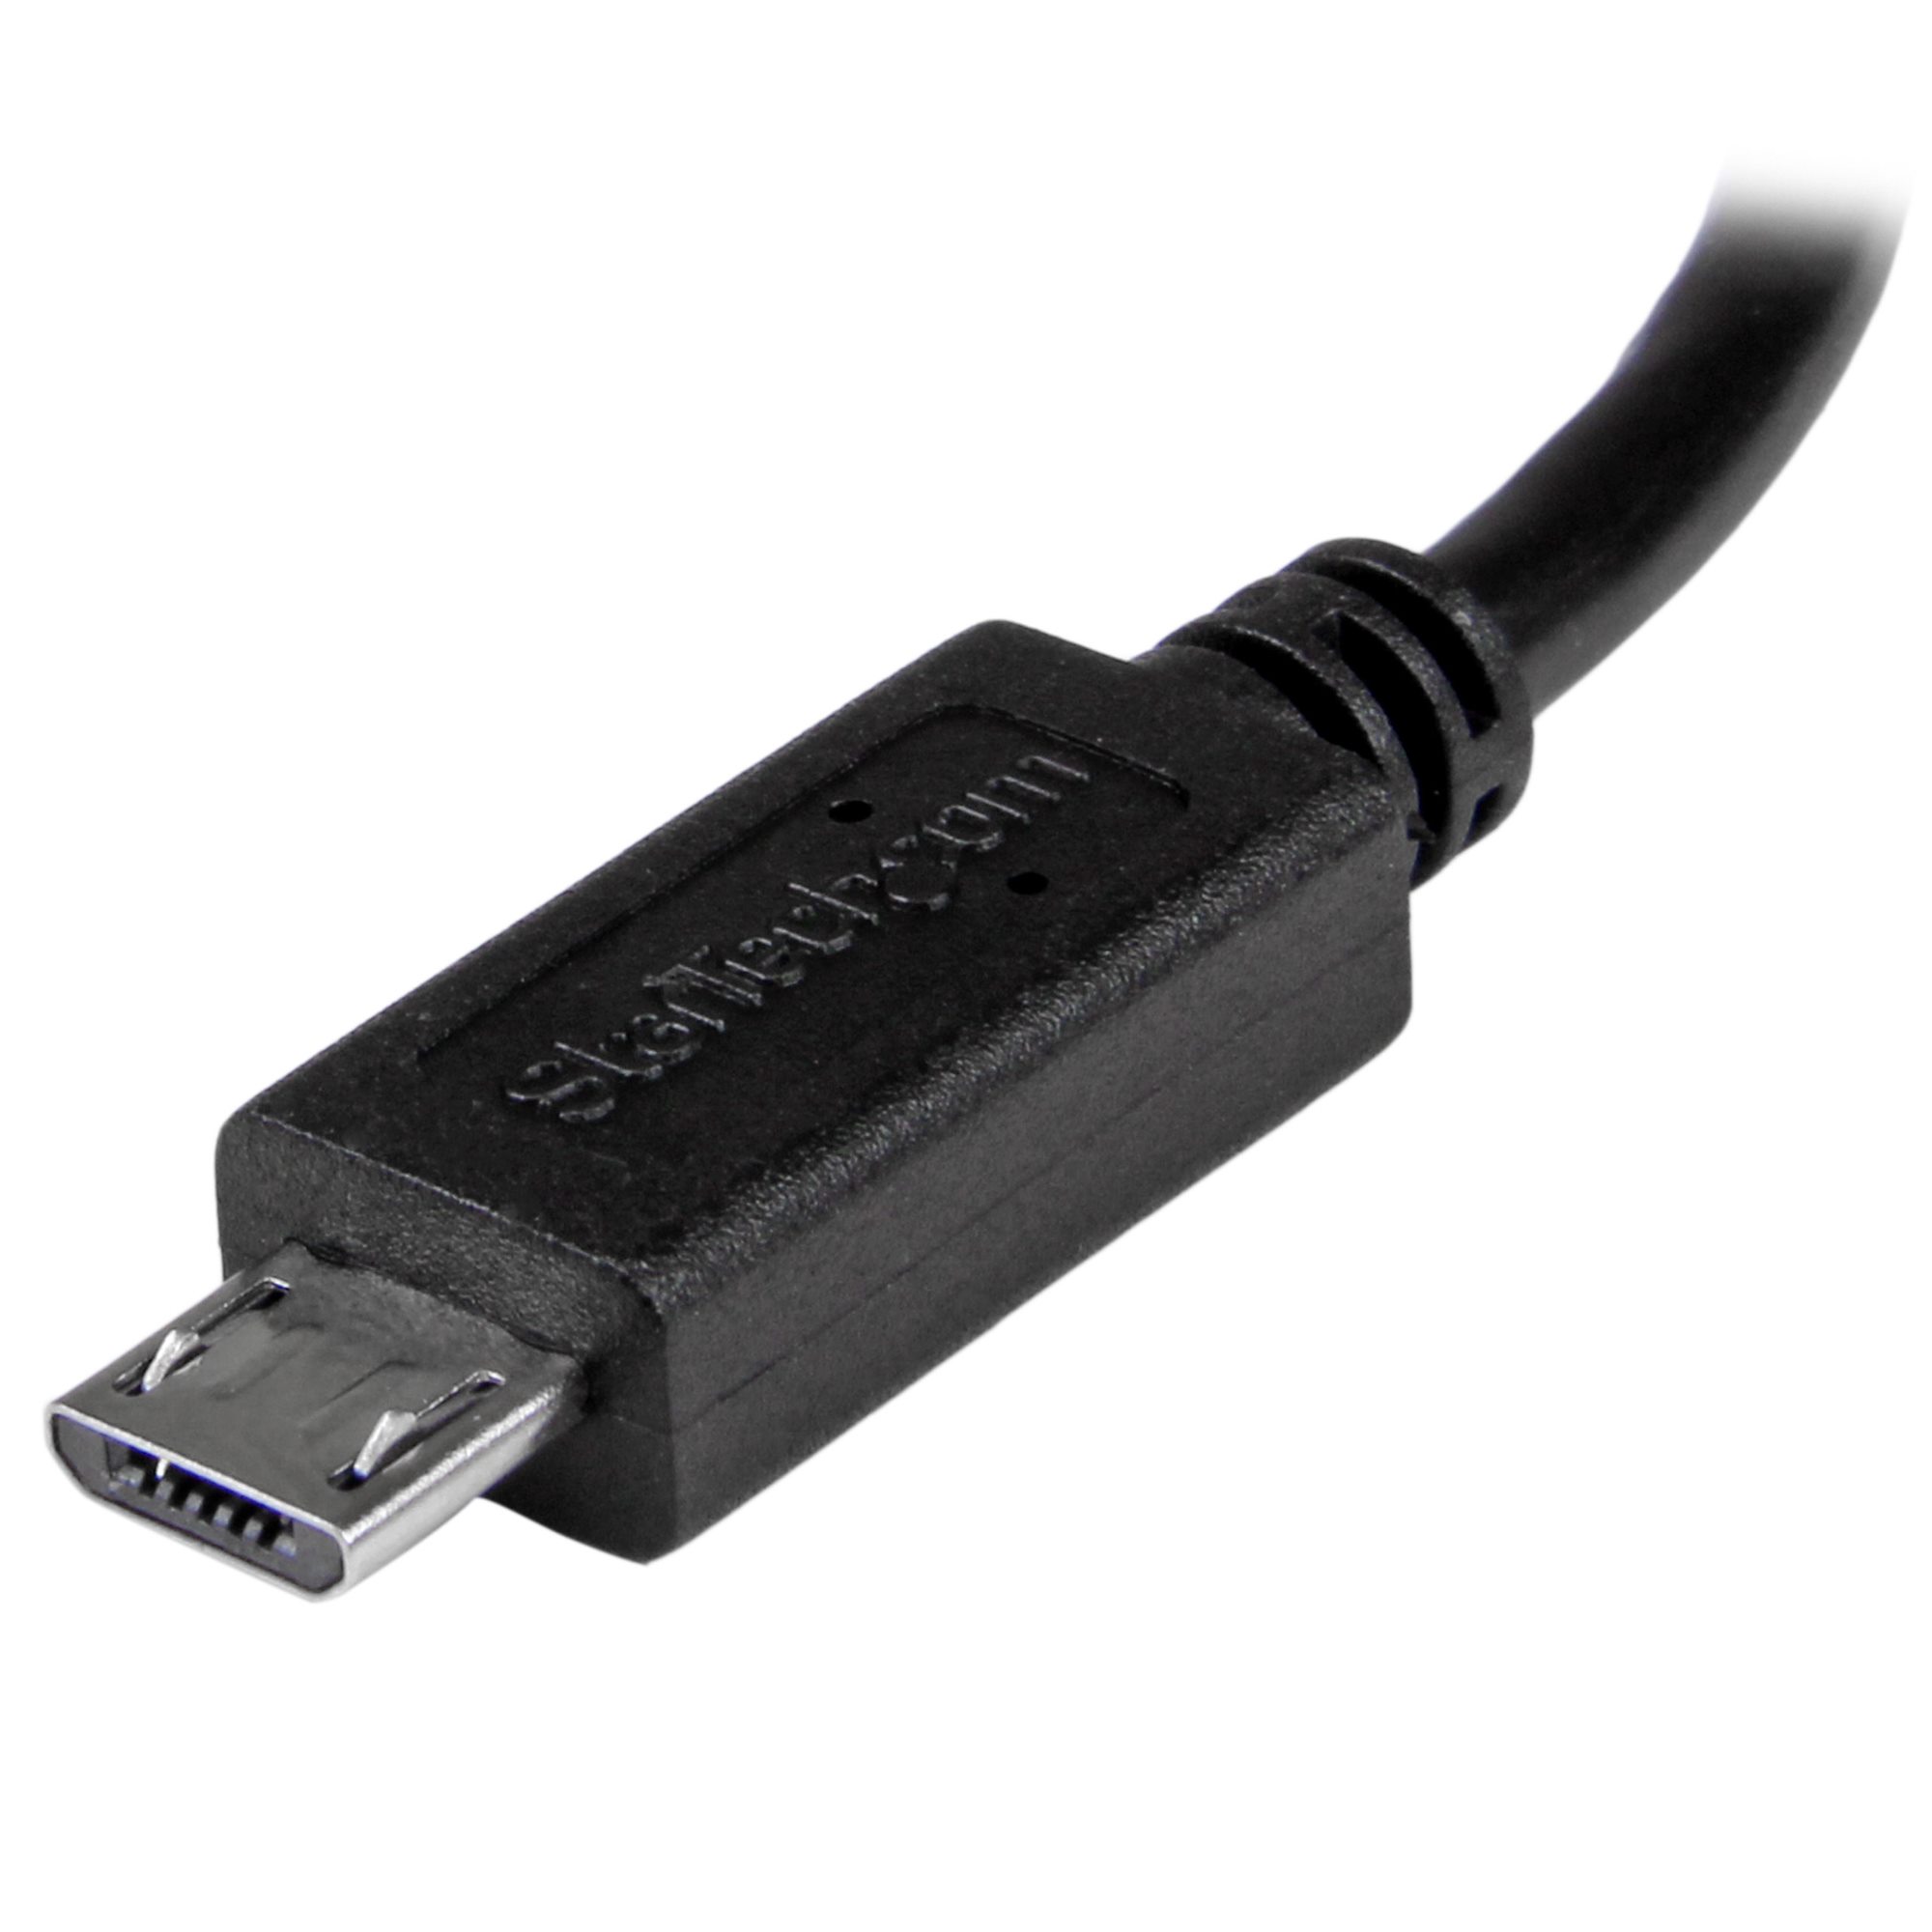 USB OTG Cable – Micro USB to Mini USB – M/M – 8 in. – BCI Imaging Supplies